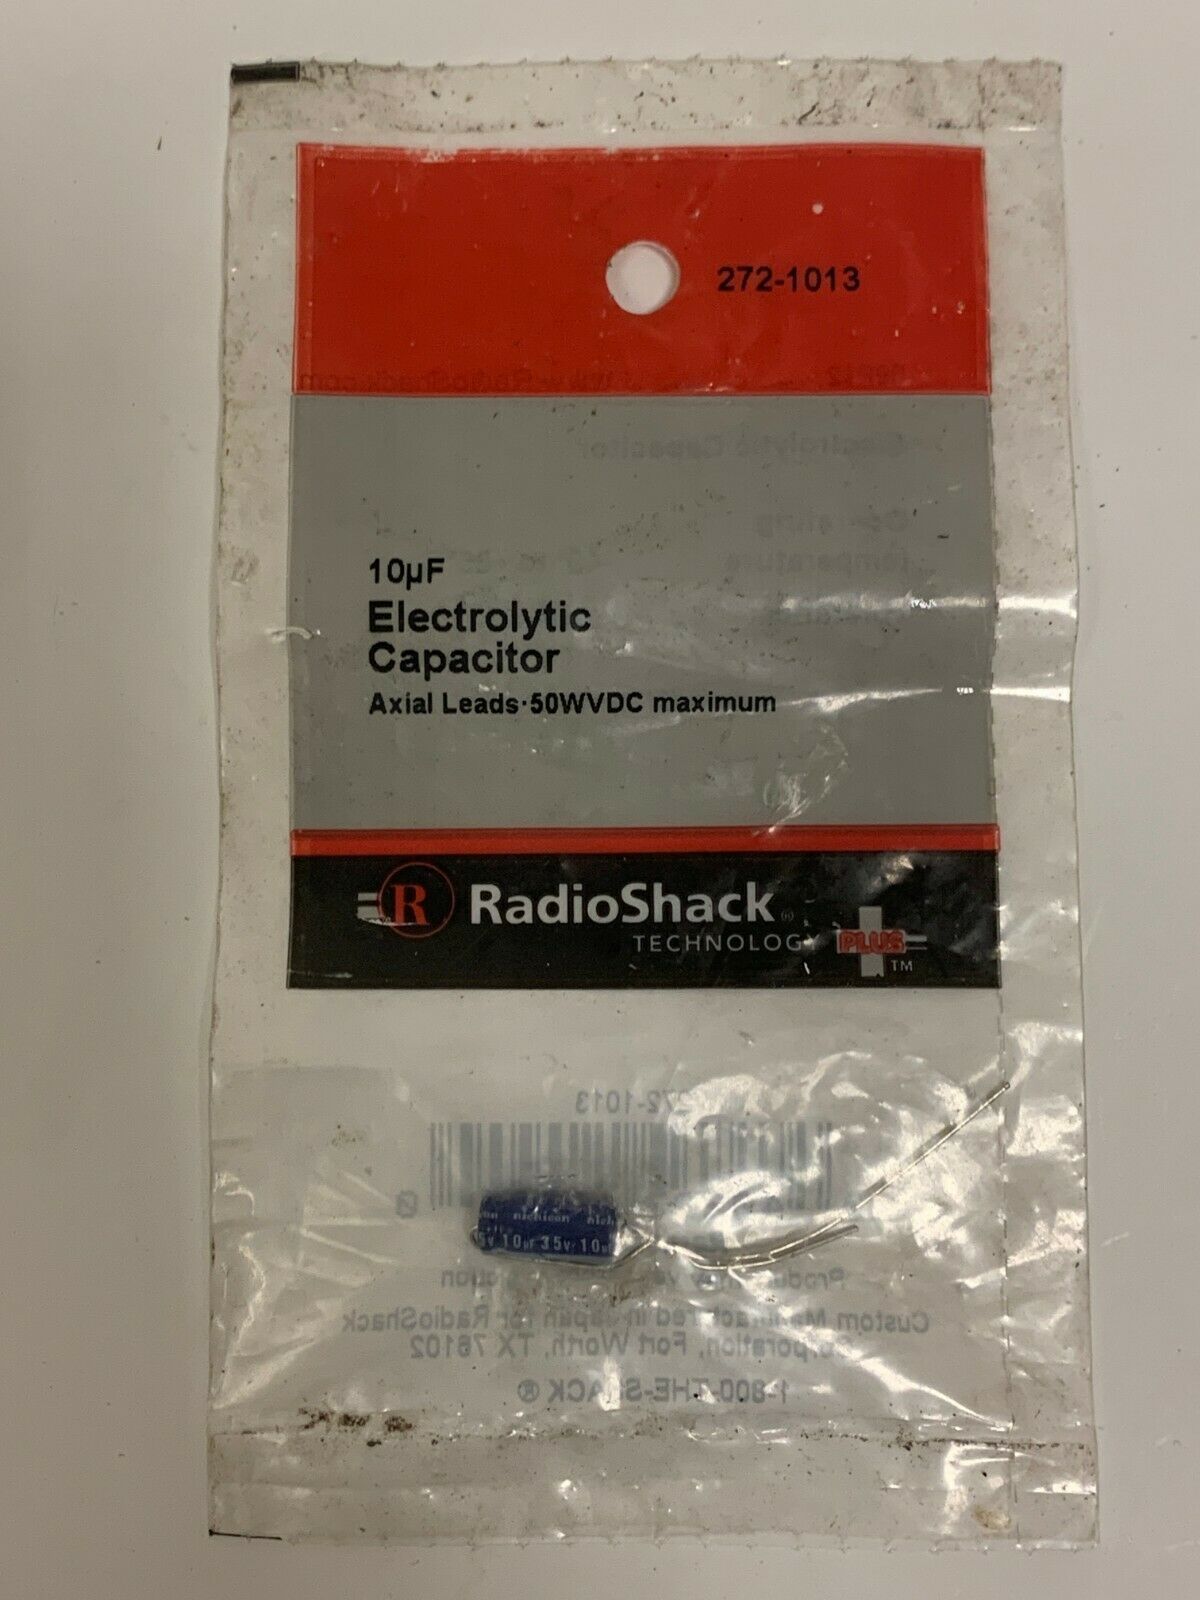 RADIO SHACK 272-1013 10UF ELECTROLYTIC CAPACITOR 50WVDC max 2721013 axial leads - $6.99